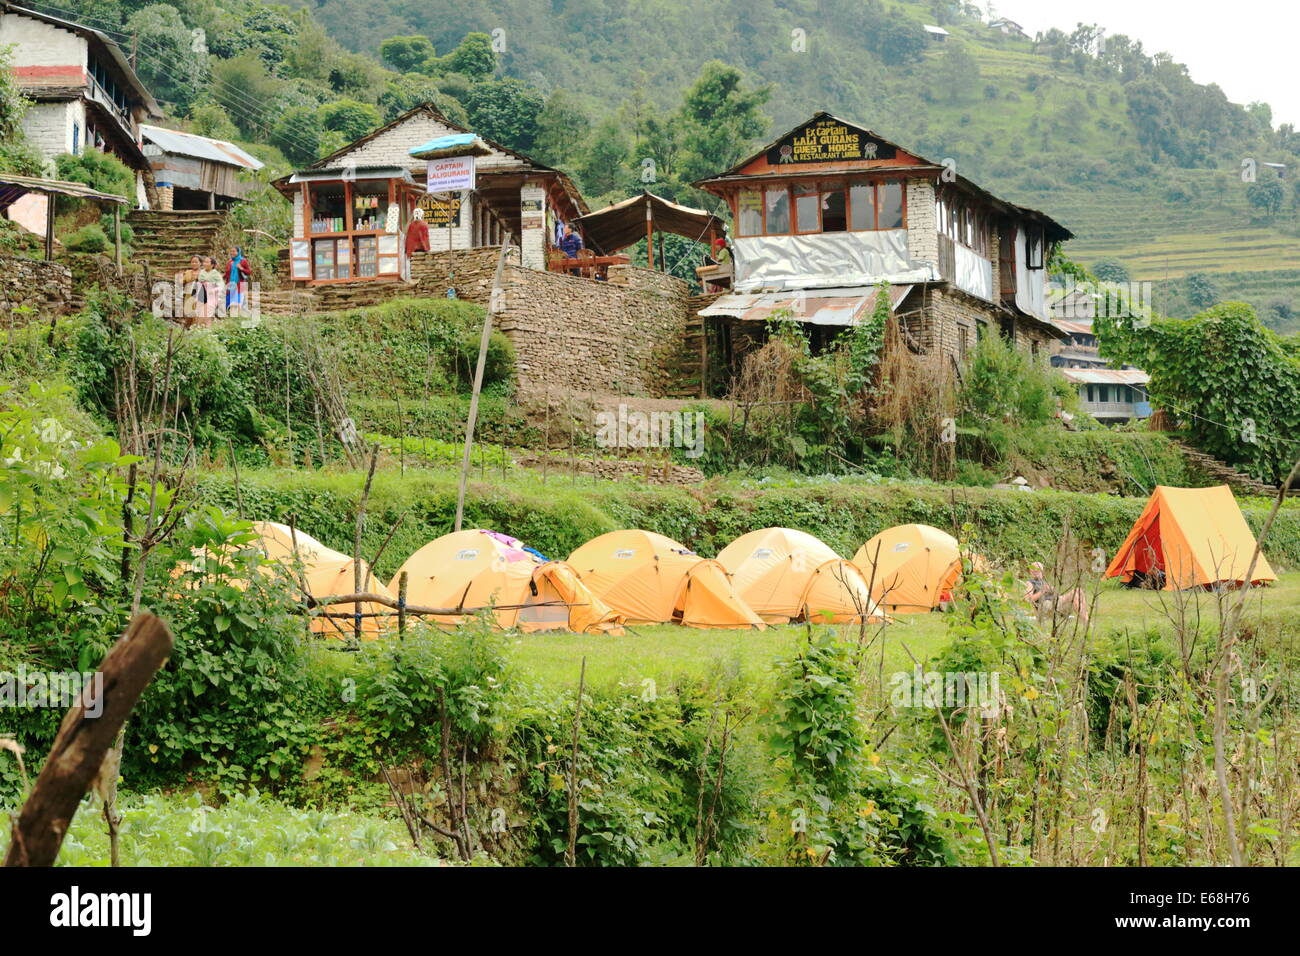 LANDRUK, NEPAL - OCTOBER 9: A tourist group camps with their yellow tents on a campsite outside Lali Gurans Guest House on Octob Stock Photo